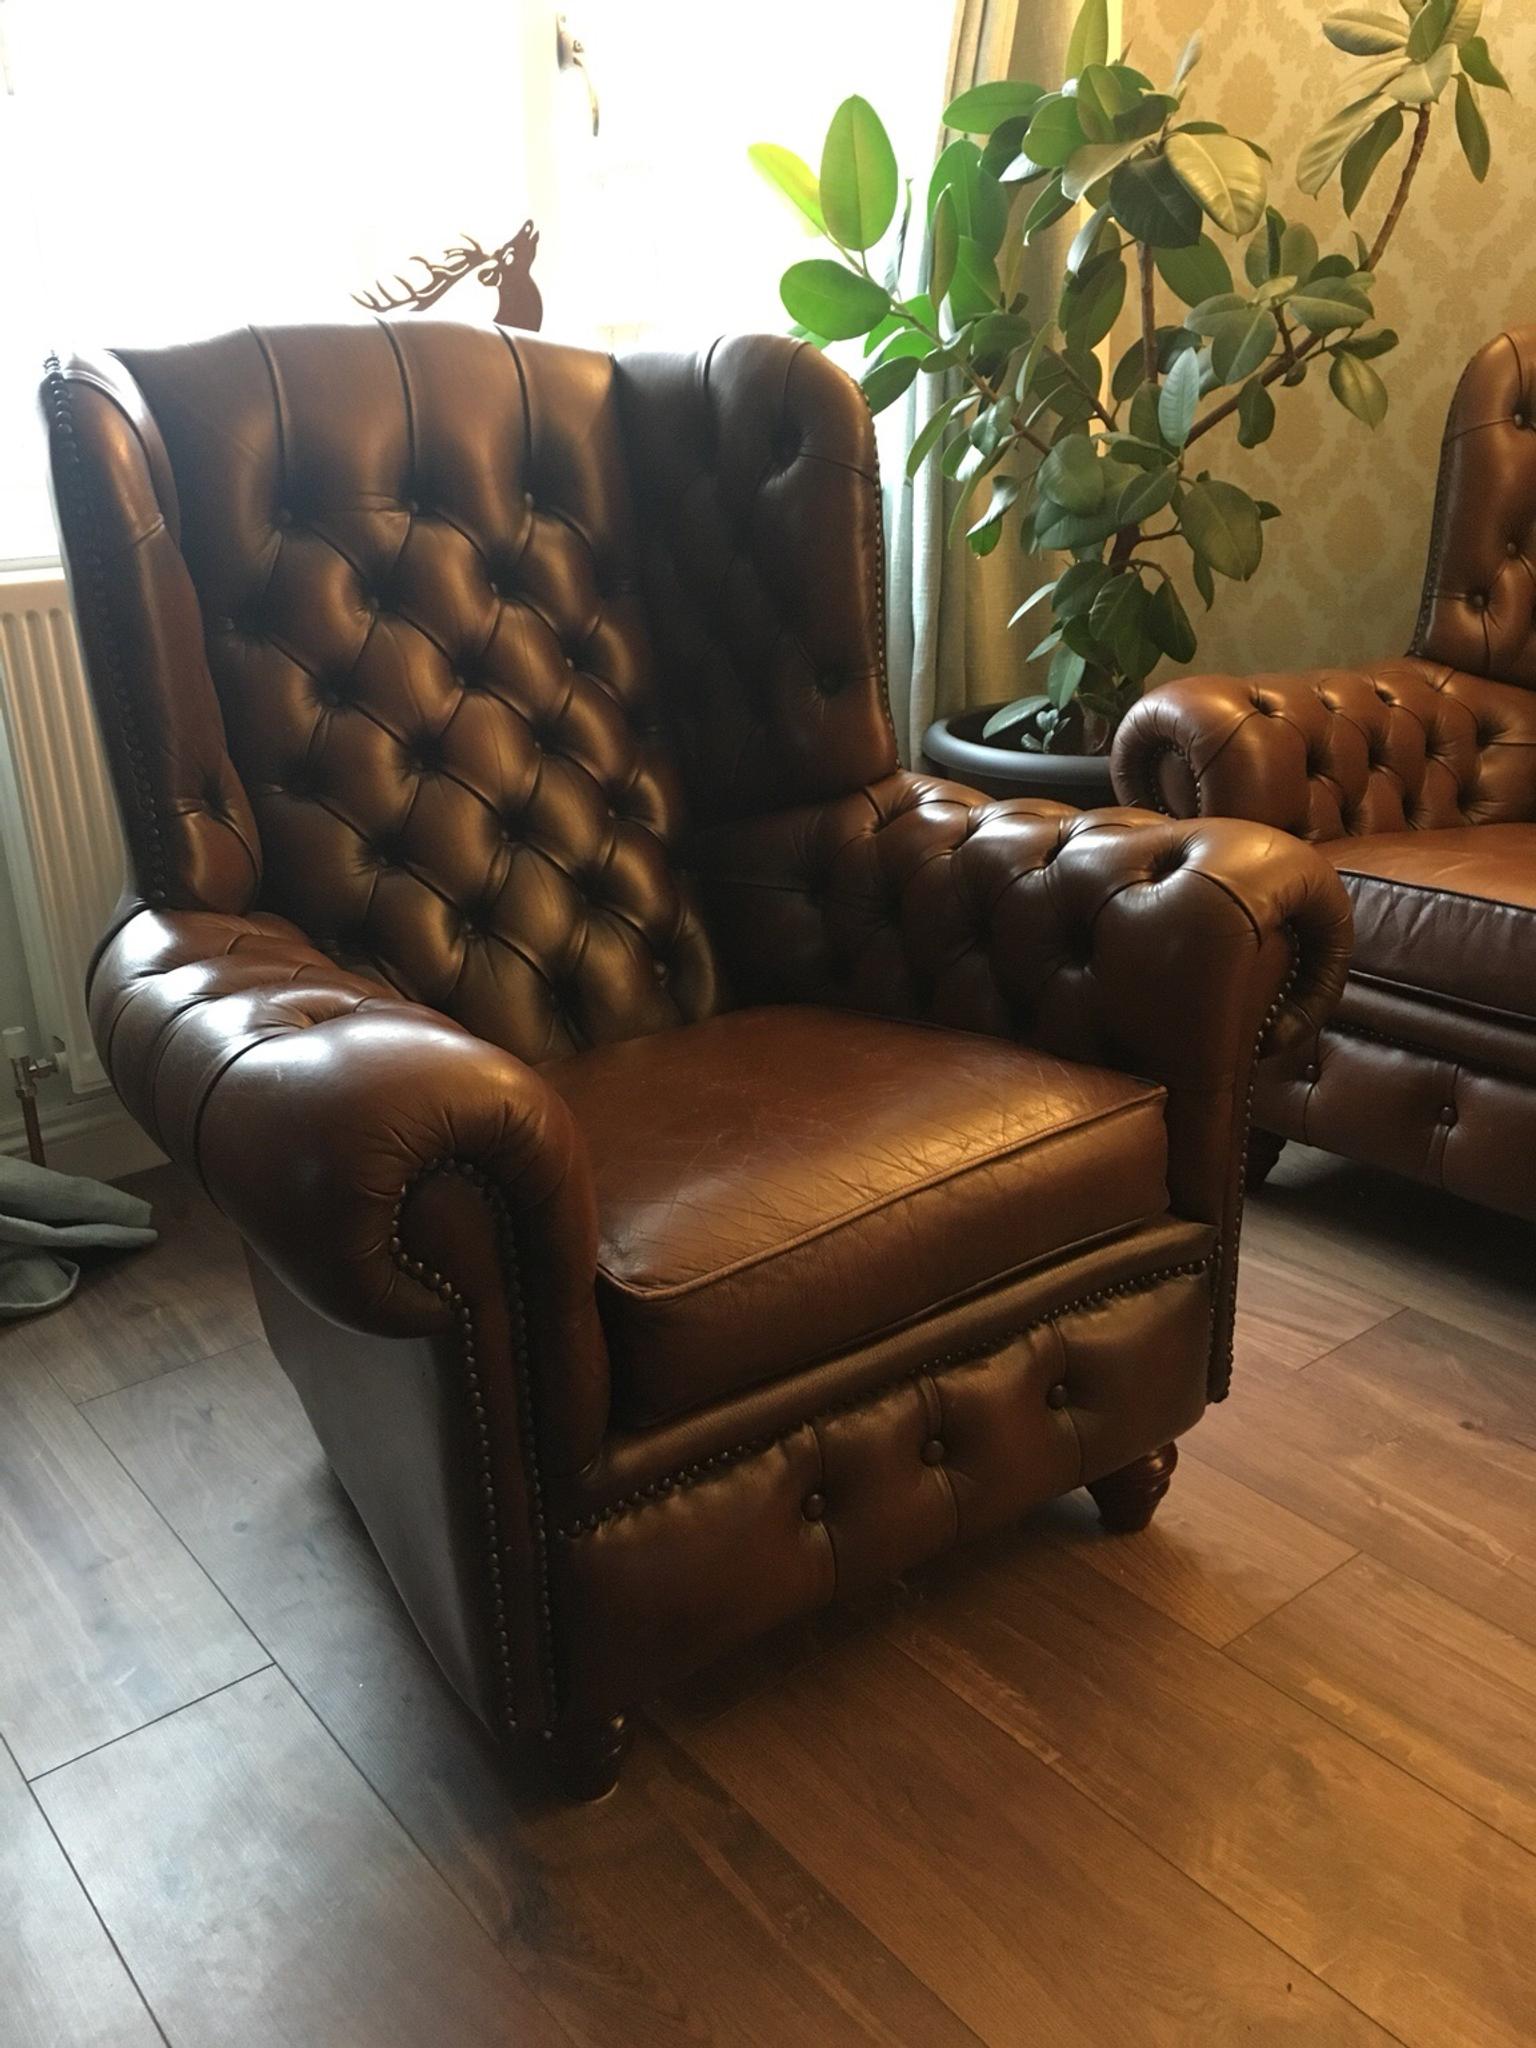 Vintage Chesterfield Sofas High Top In Bs41 Dundry Fur 450 00